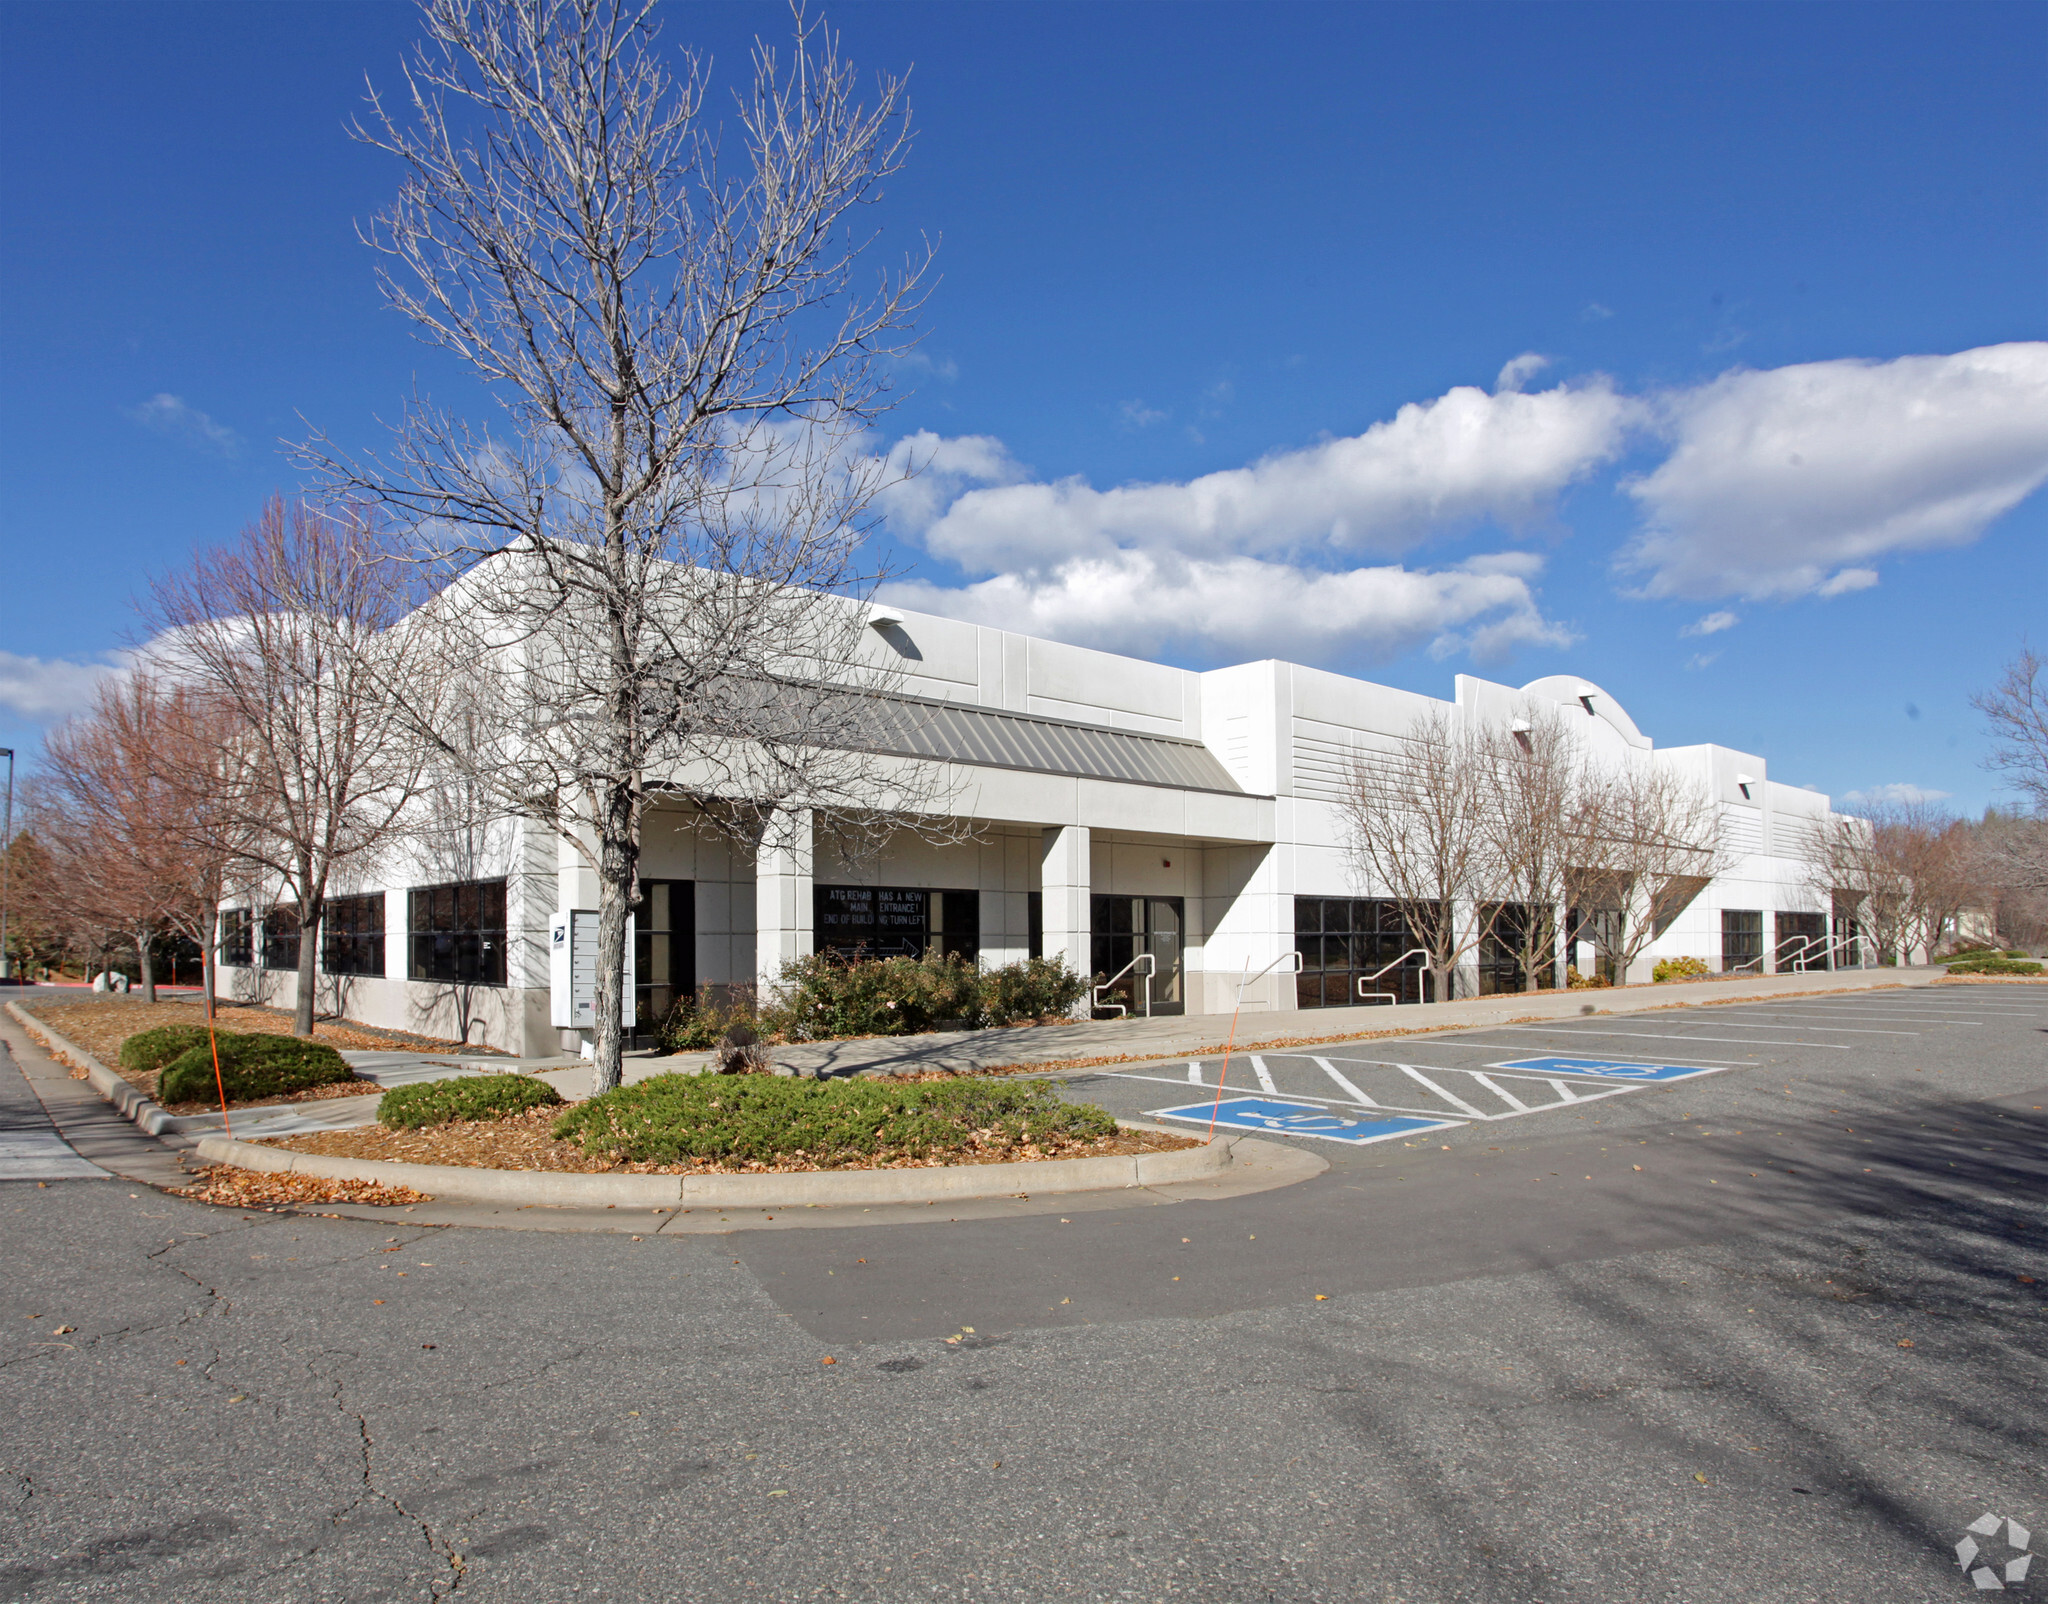 5-Year Lease Executed on Two Suites in Lakewood, CO.